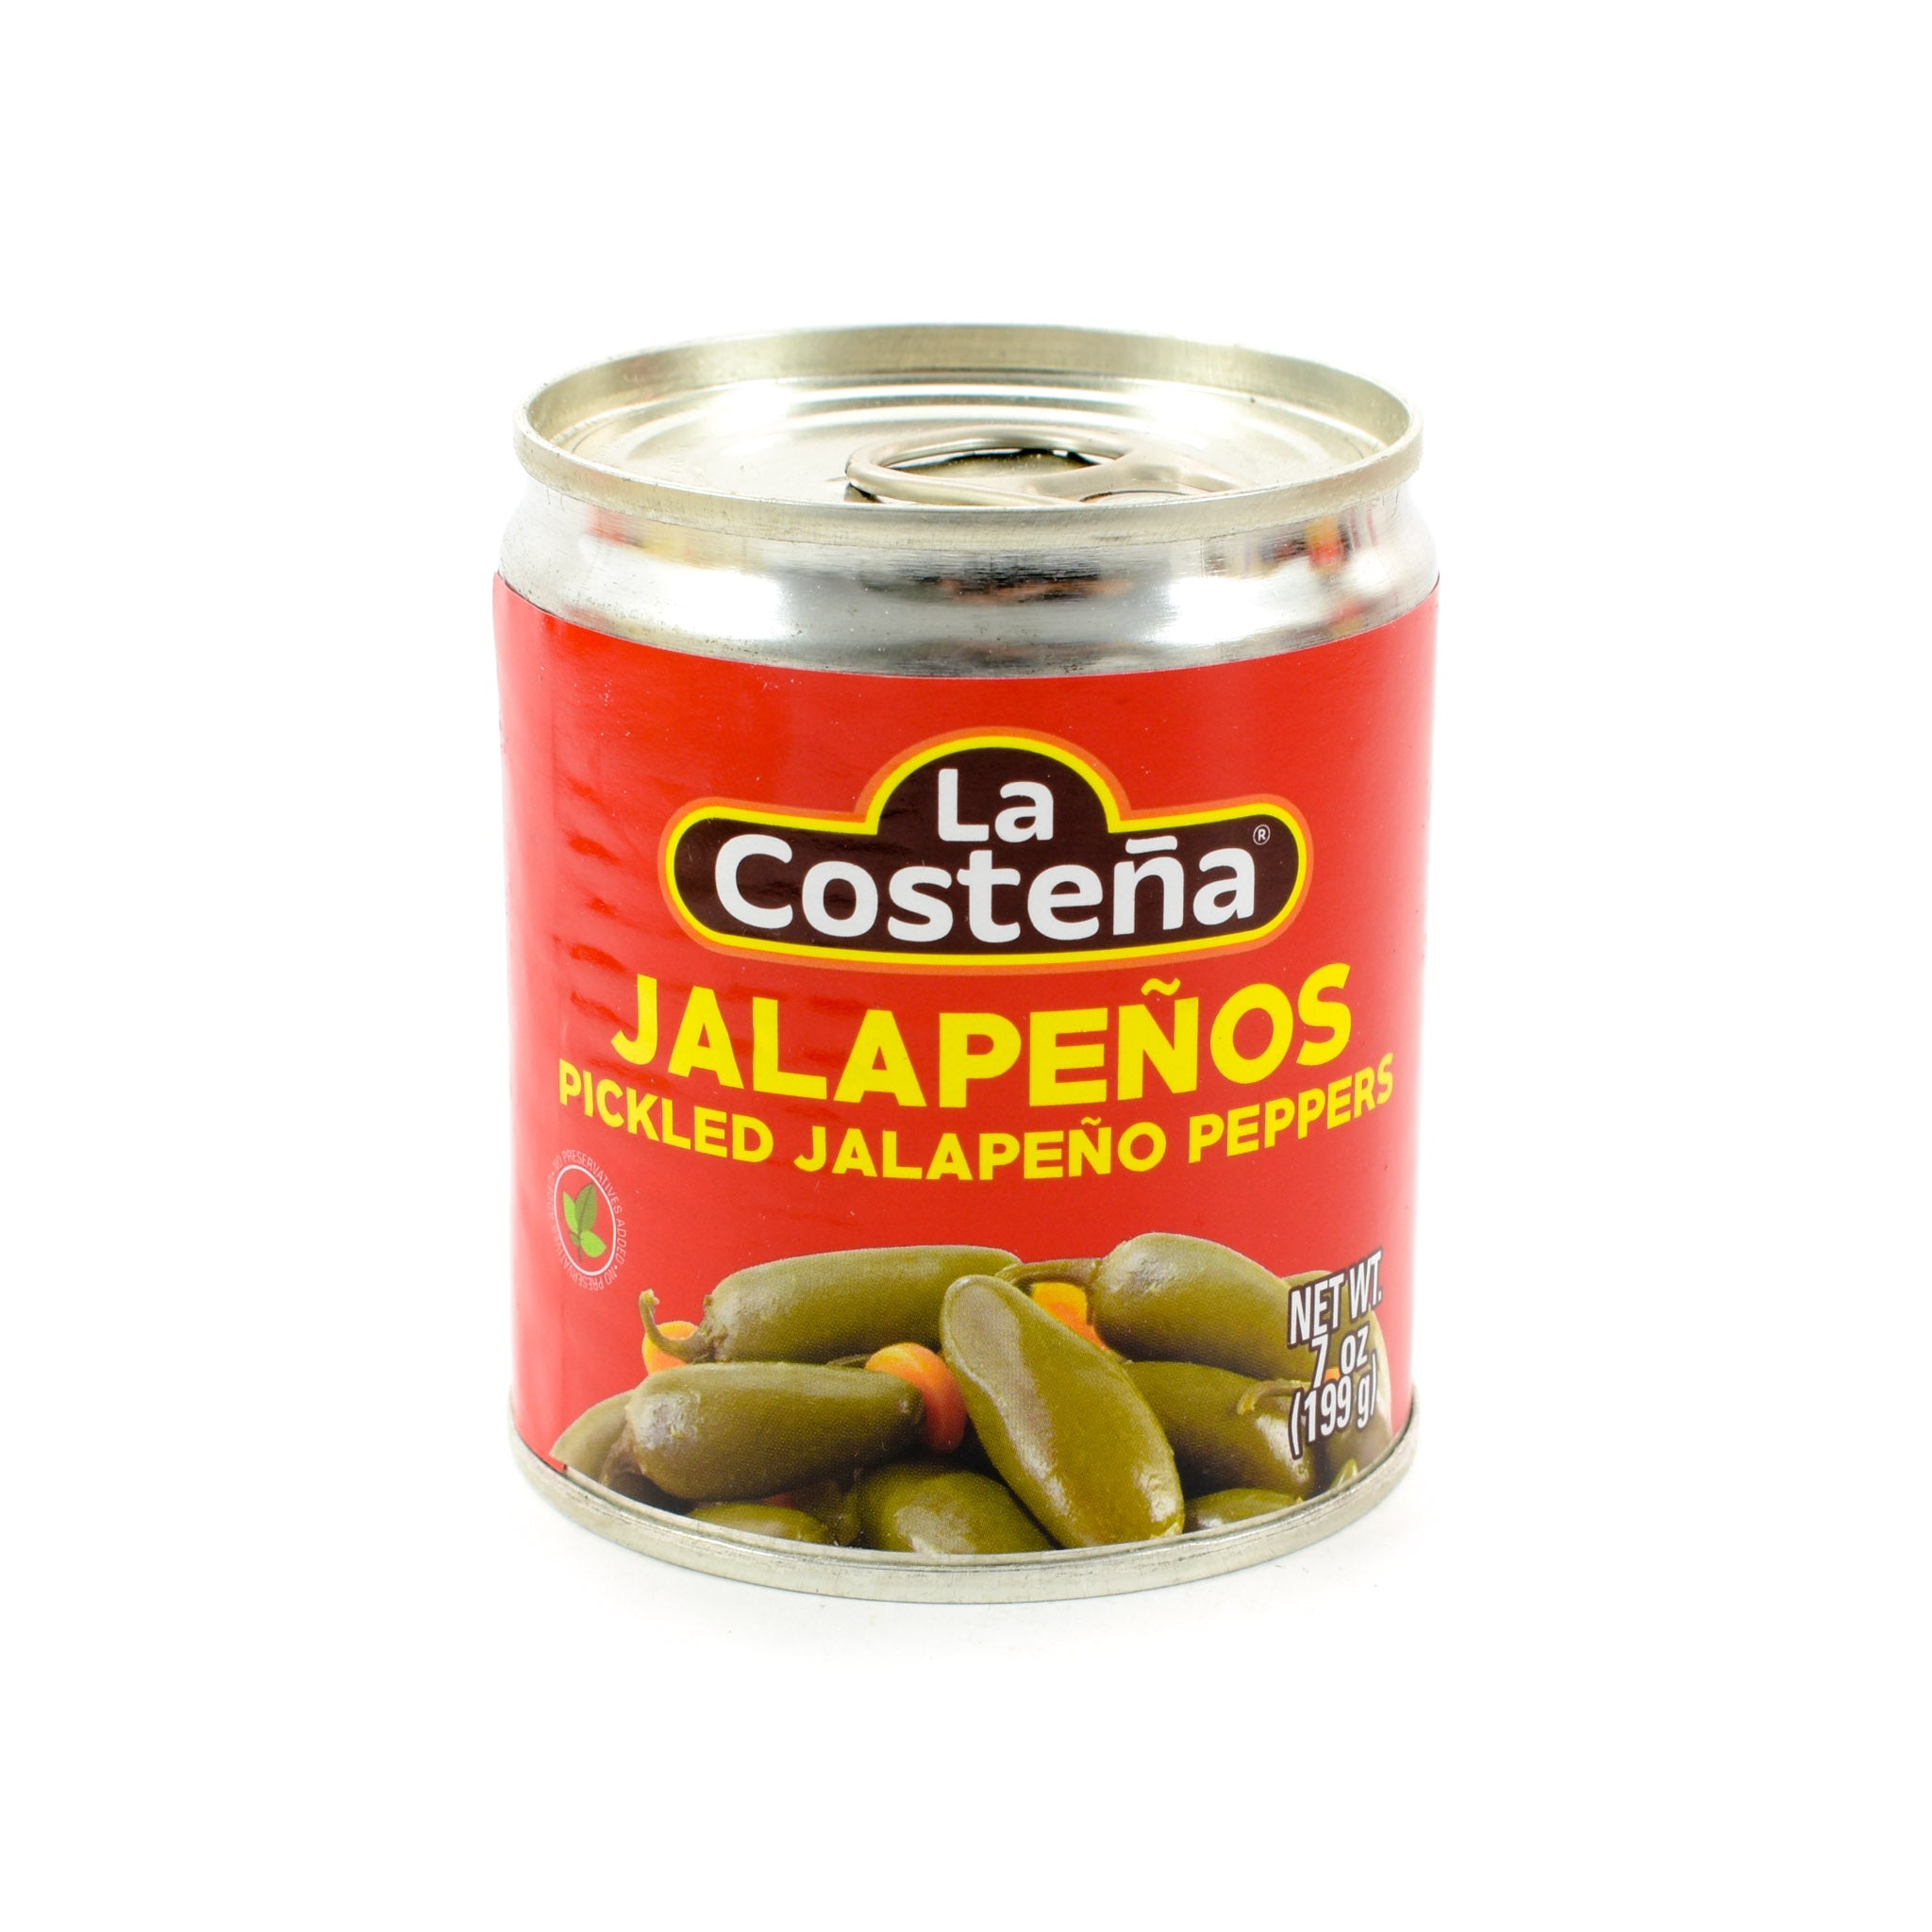 La Costena Whole Green Jalapeno Peppers, 199g